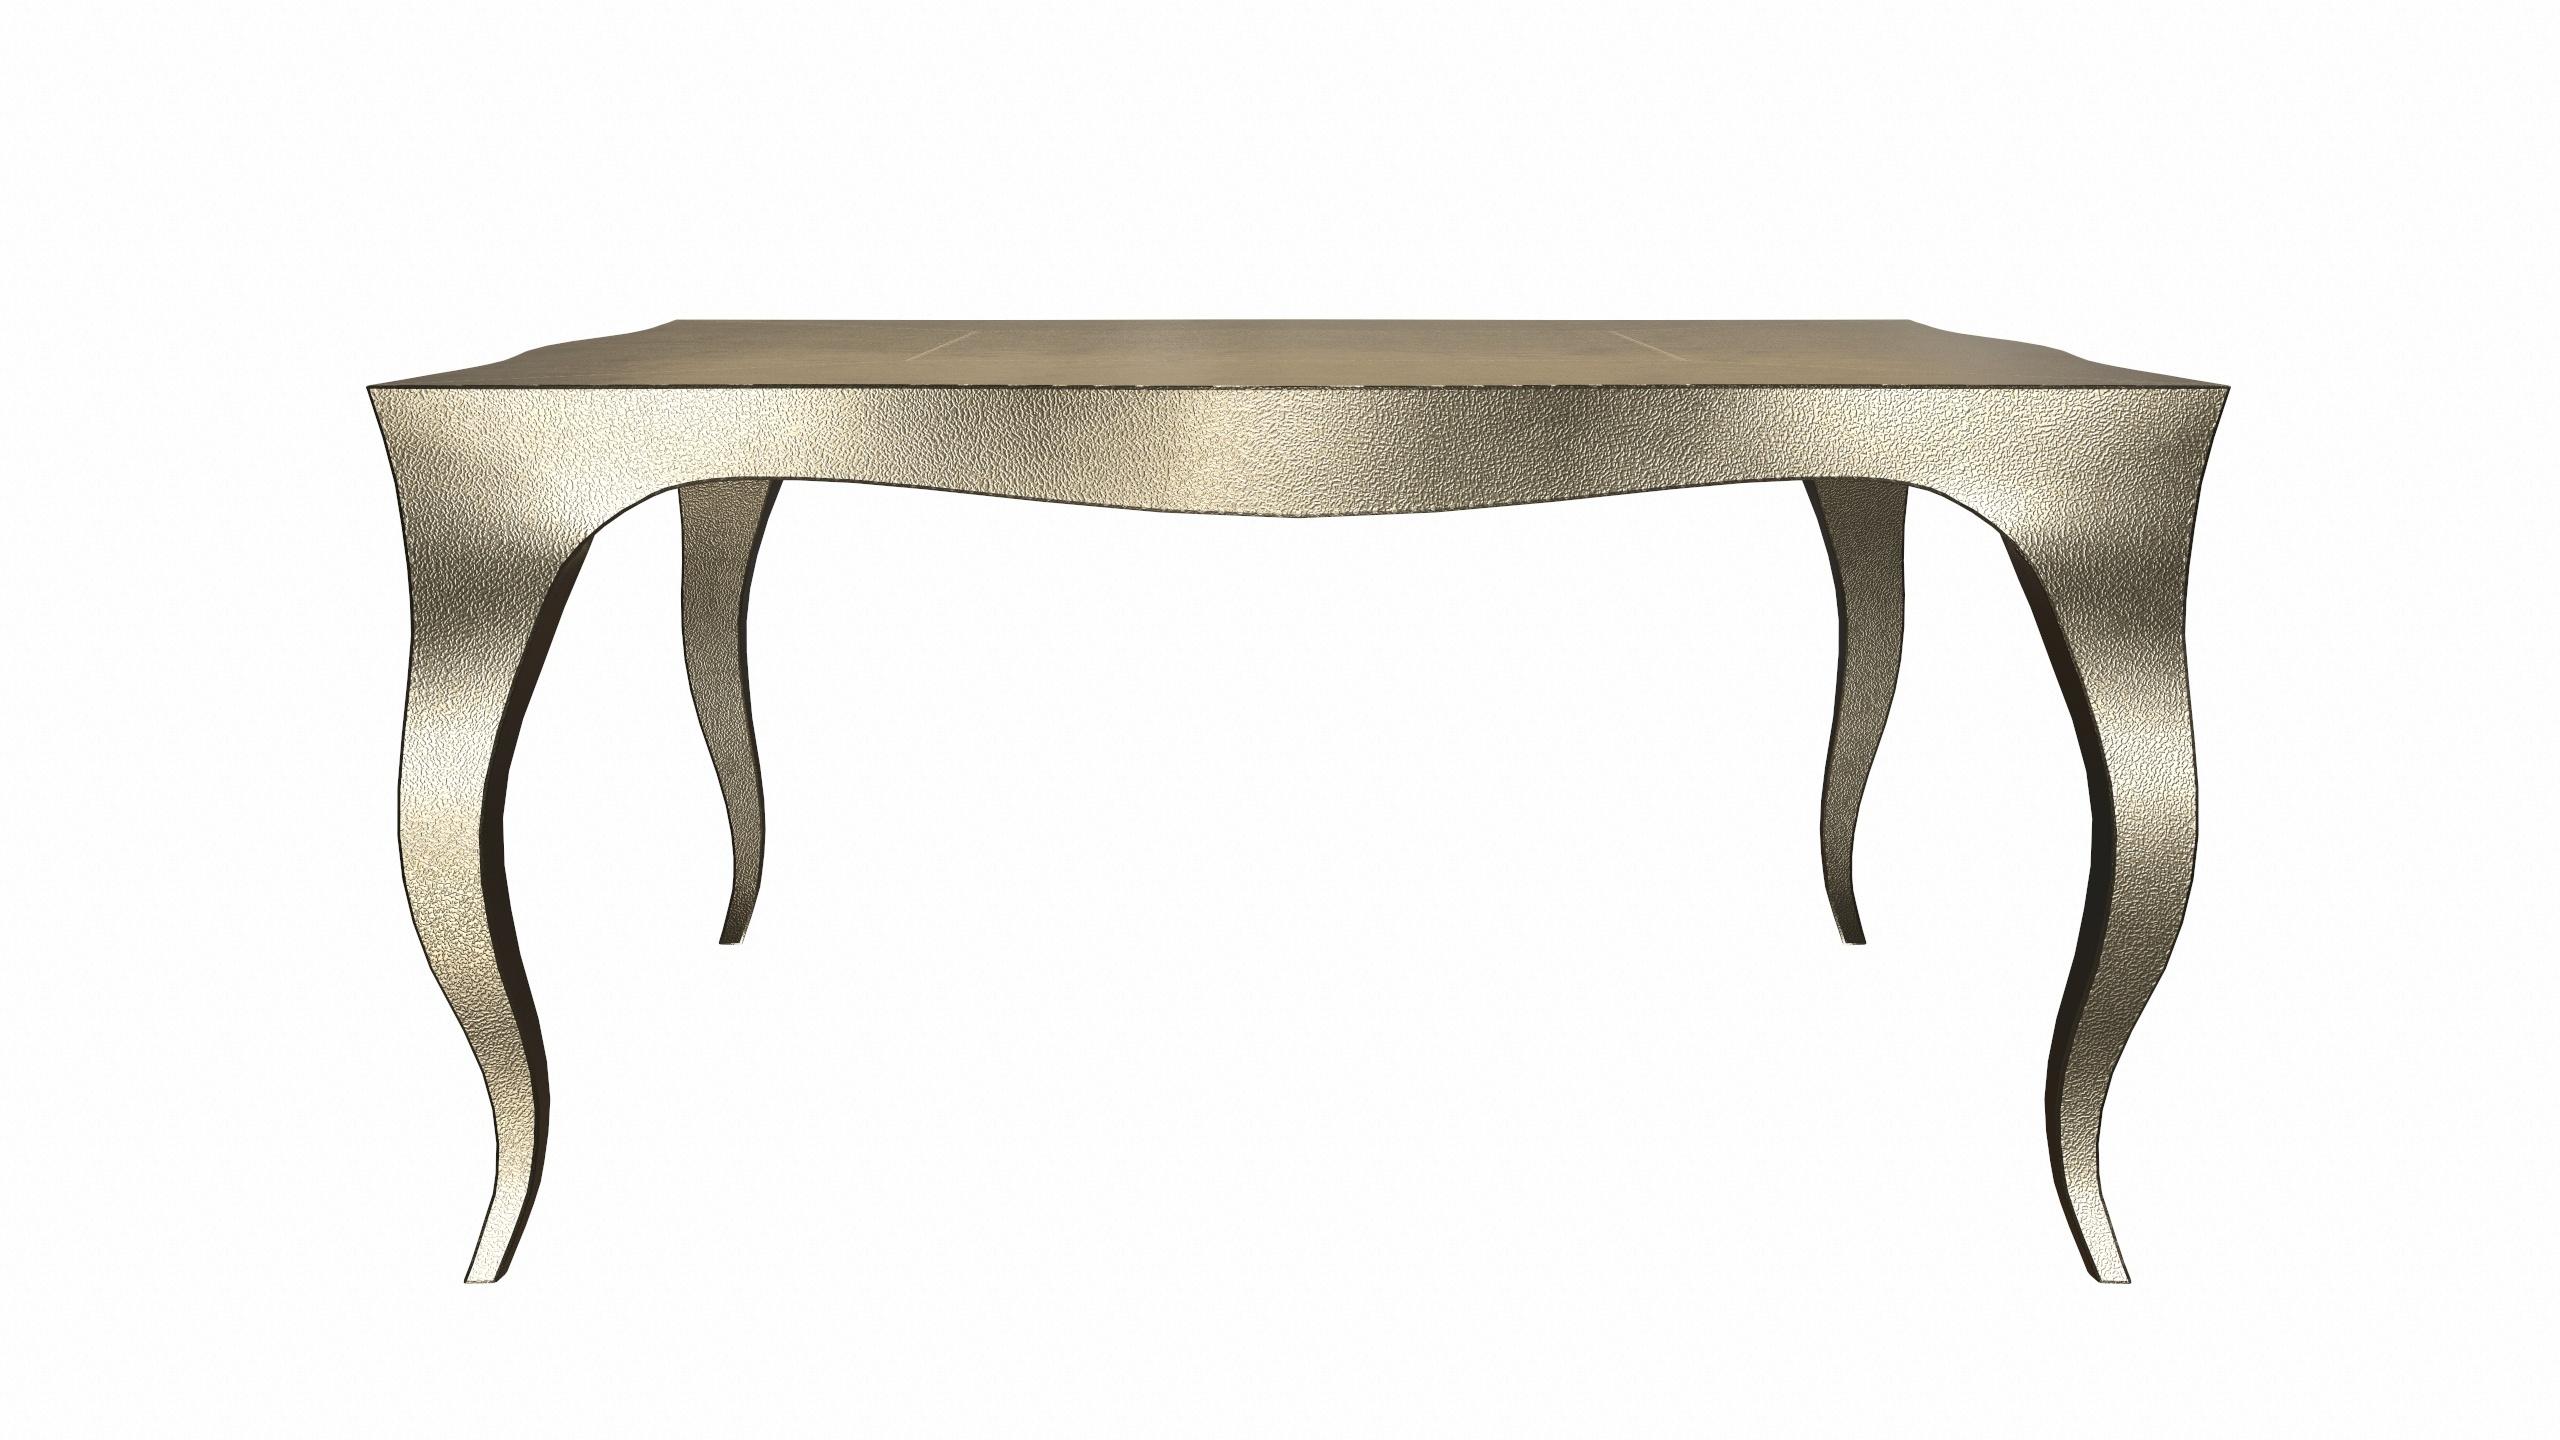 American Louise Art Deco Nesting Tables Fine Hammered Brass 18.5x18.5x10 inch by Paul M For Sale